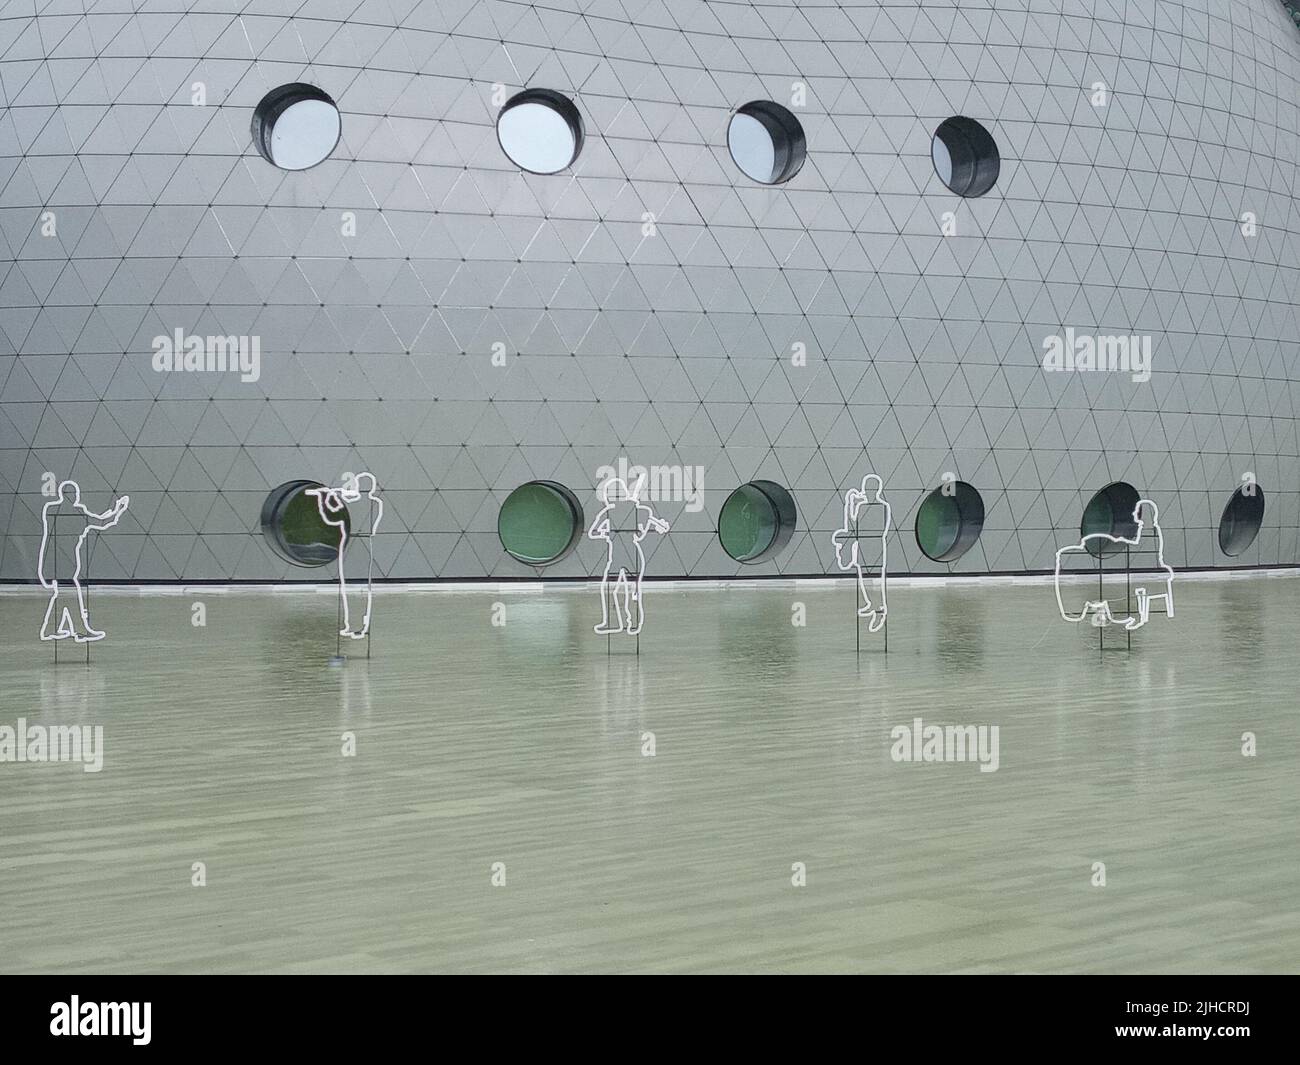 Ankara, Turkey – June 6, 2022: The Presidential Symphony Orchestra's pool decorated with musical instruments as part of the Culture Festival. Stock Photo